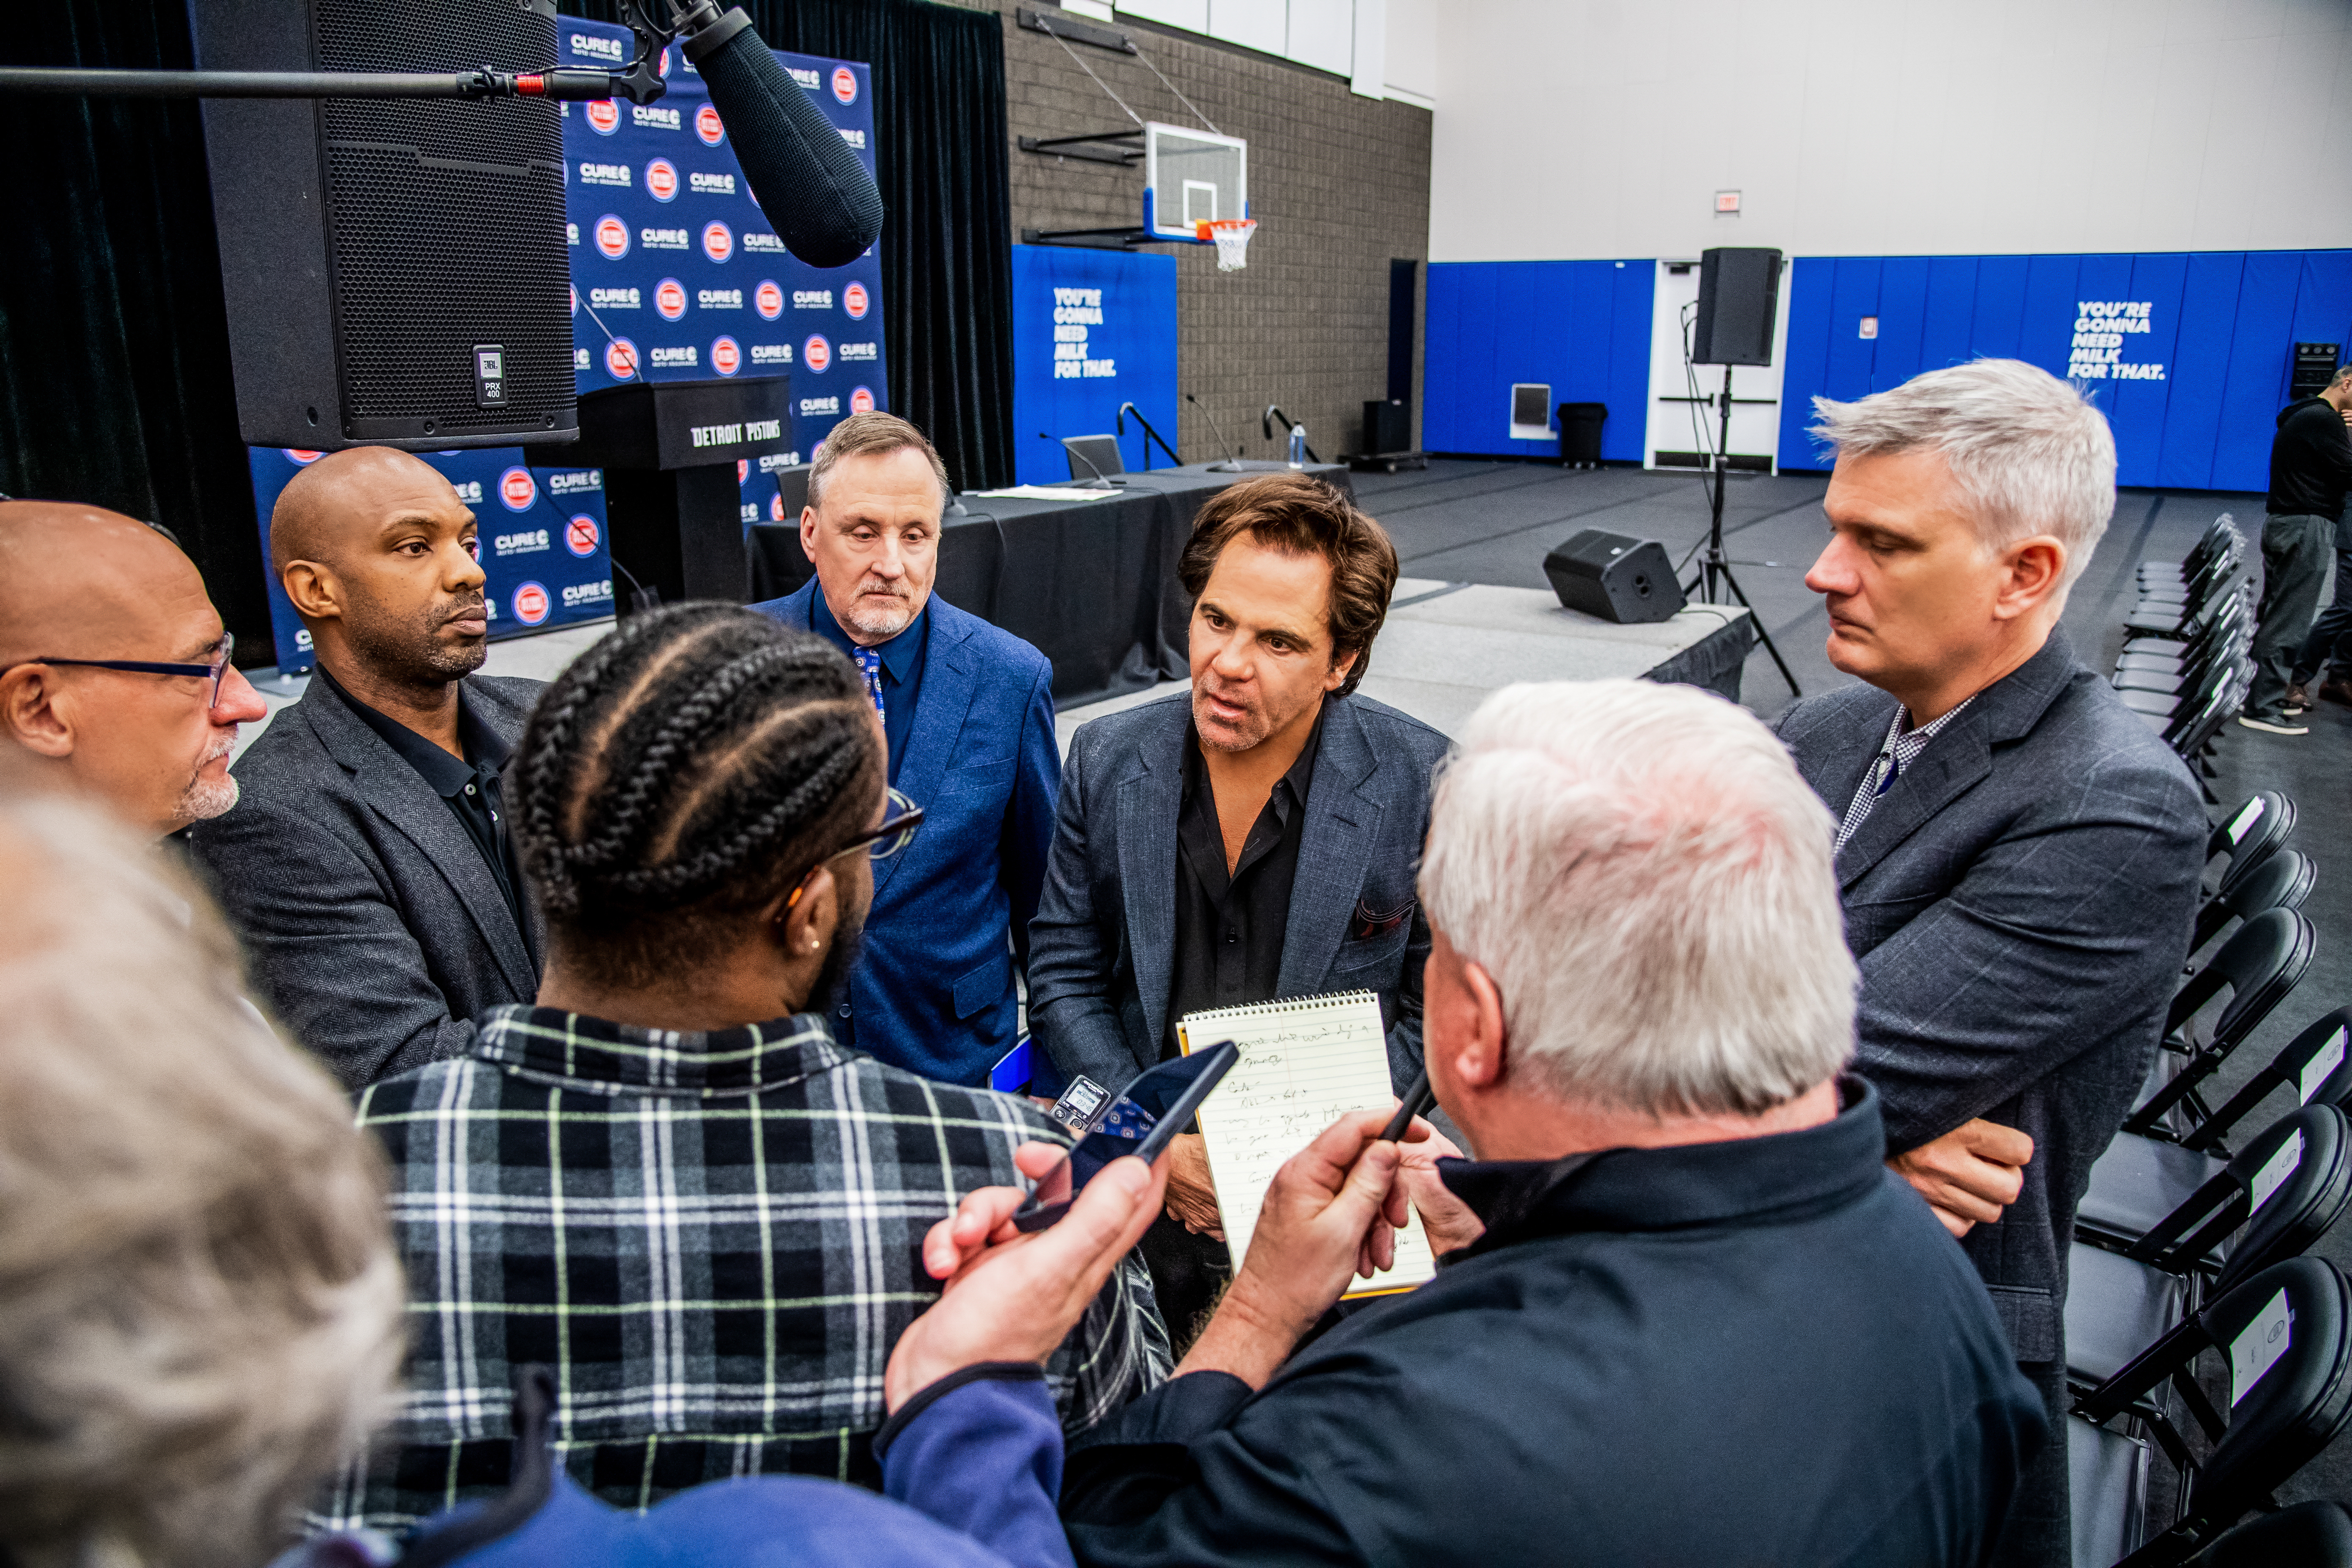 Detroit Free Press: Pistons owner Tom Gores expresses ‘cautious optimism’ on franchise direction